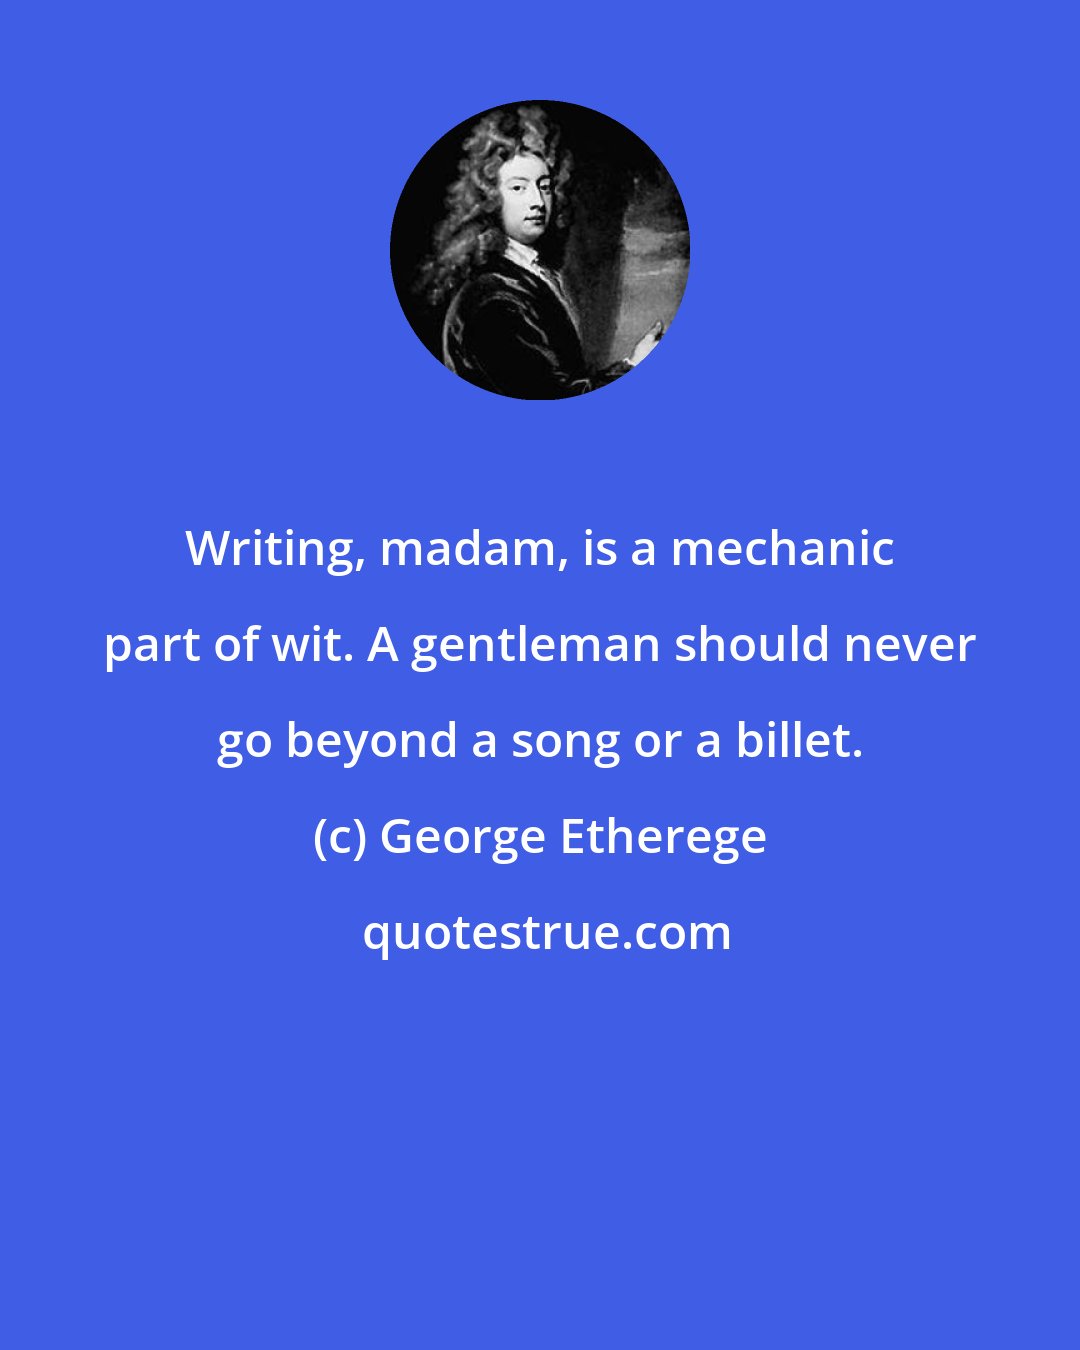 George Etherege: Writing, madam, is a mechanic part of wit. A gentleman should never go beyond a song or a billet.